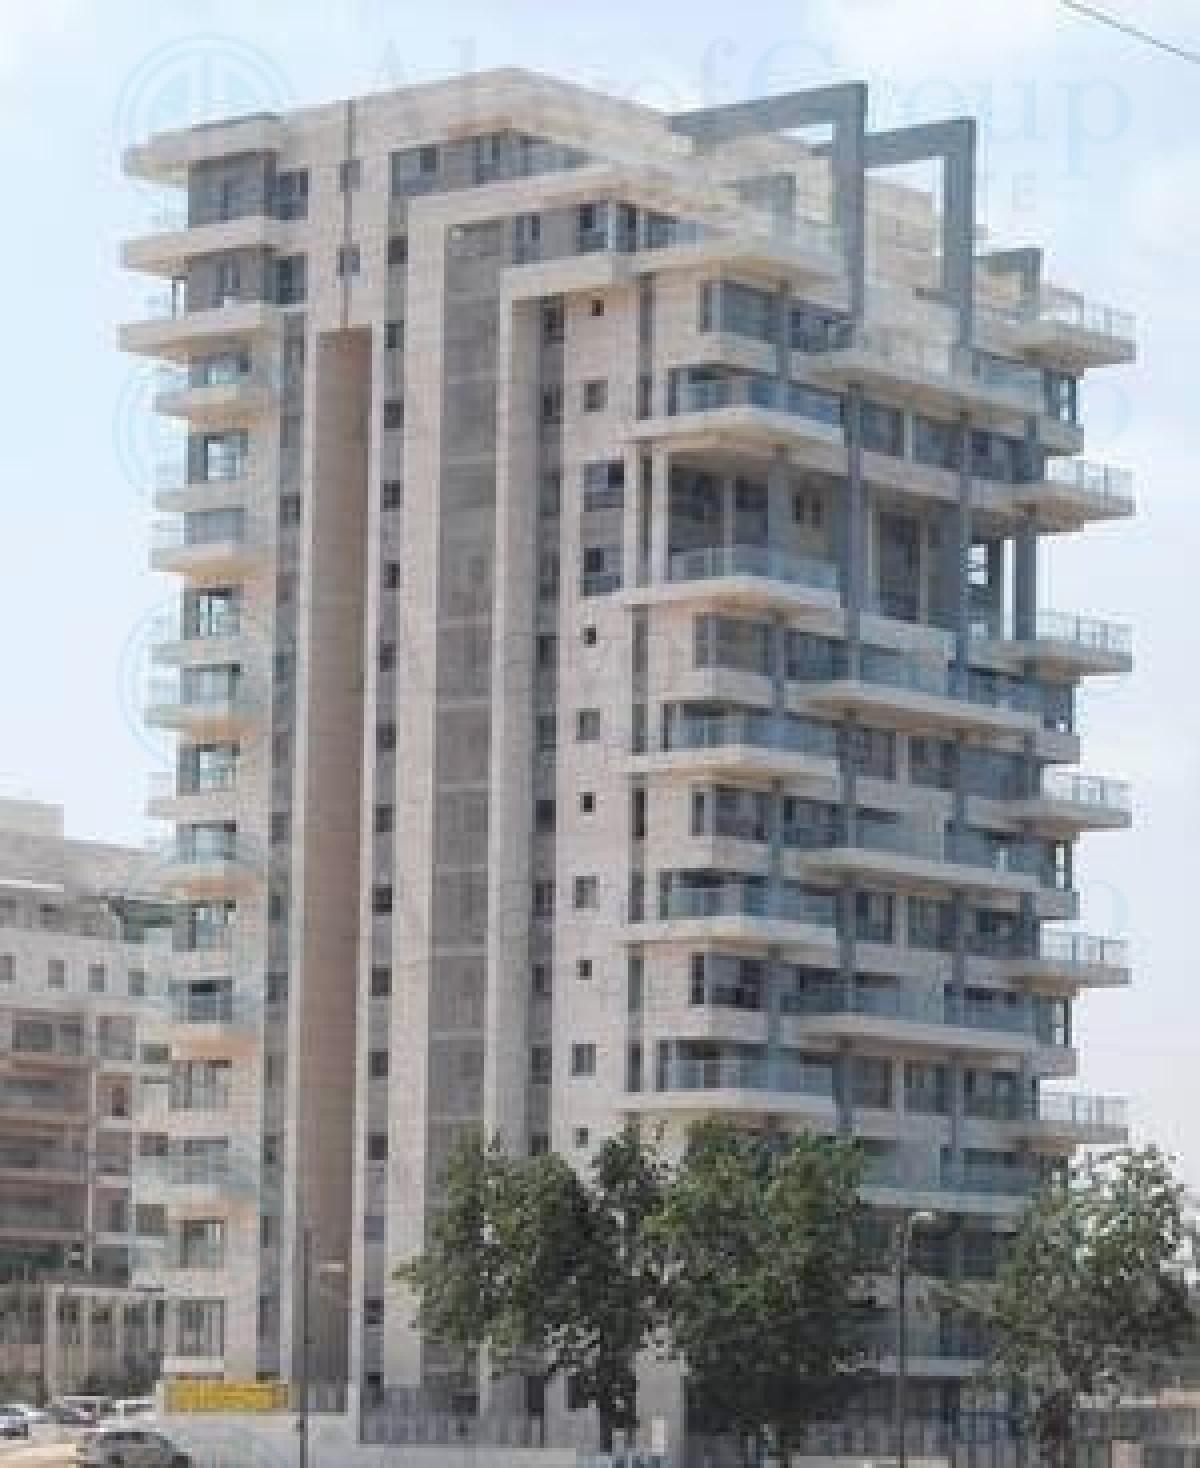 Picture of Apartment For Rent in Tel Aviv, Tel Aviv District, Israel